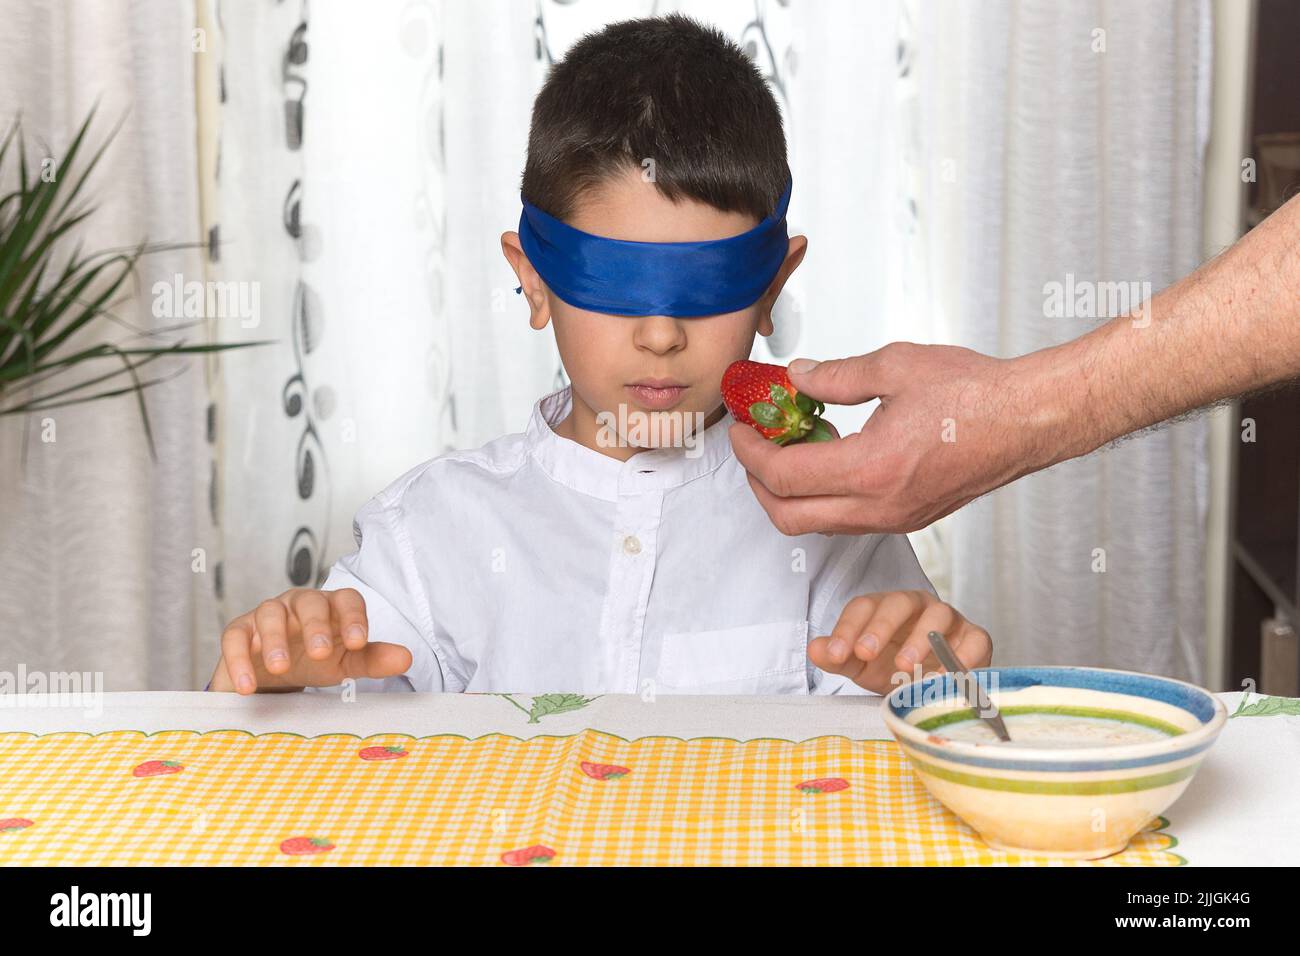 An 8-year-old Caucasian boy sitting at the table at home is blindfolded and has just tasted a strawberry offered by an adult's hand. Stock Photo